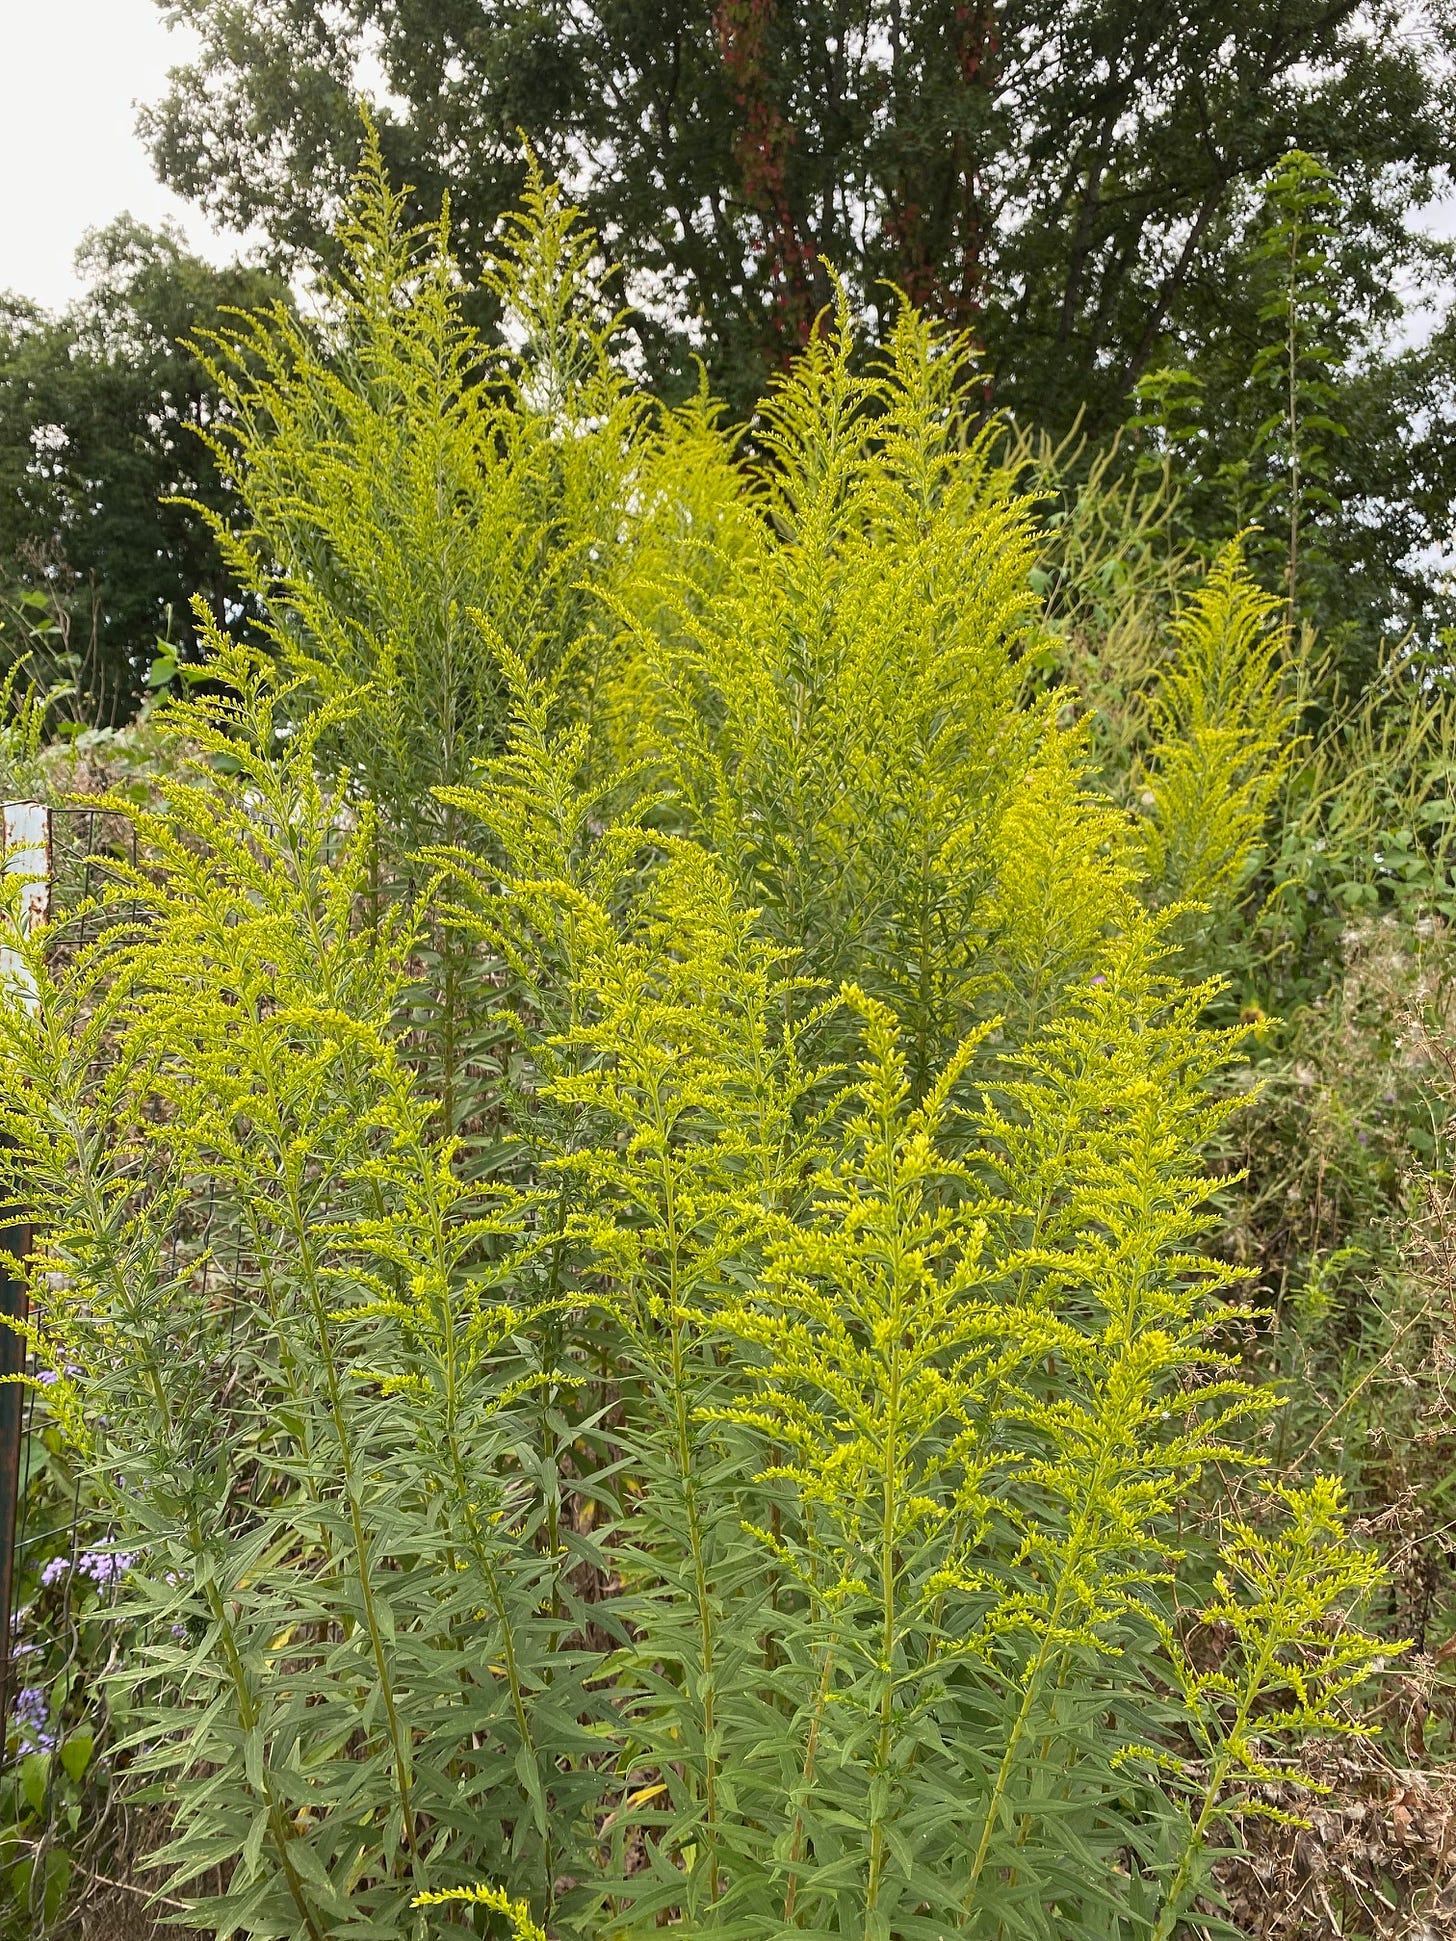 Goldenrod, Solidago canadensis, can reach over 2 meters in height. 